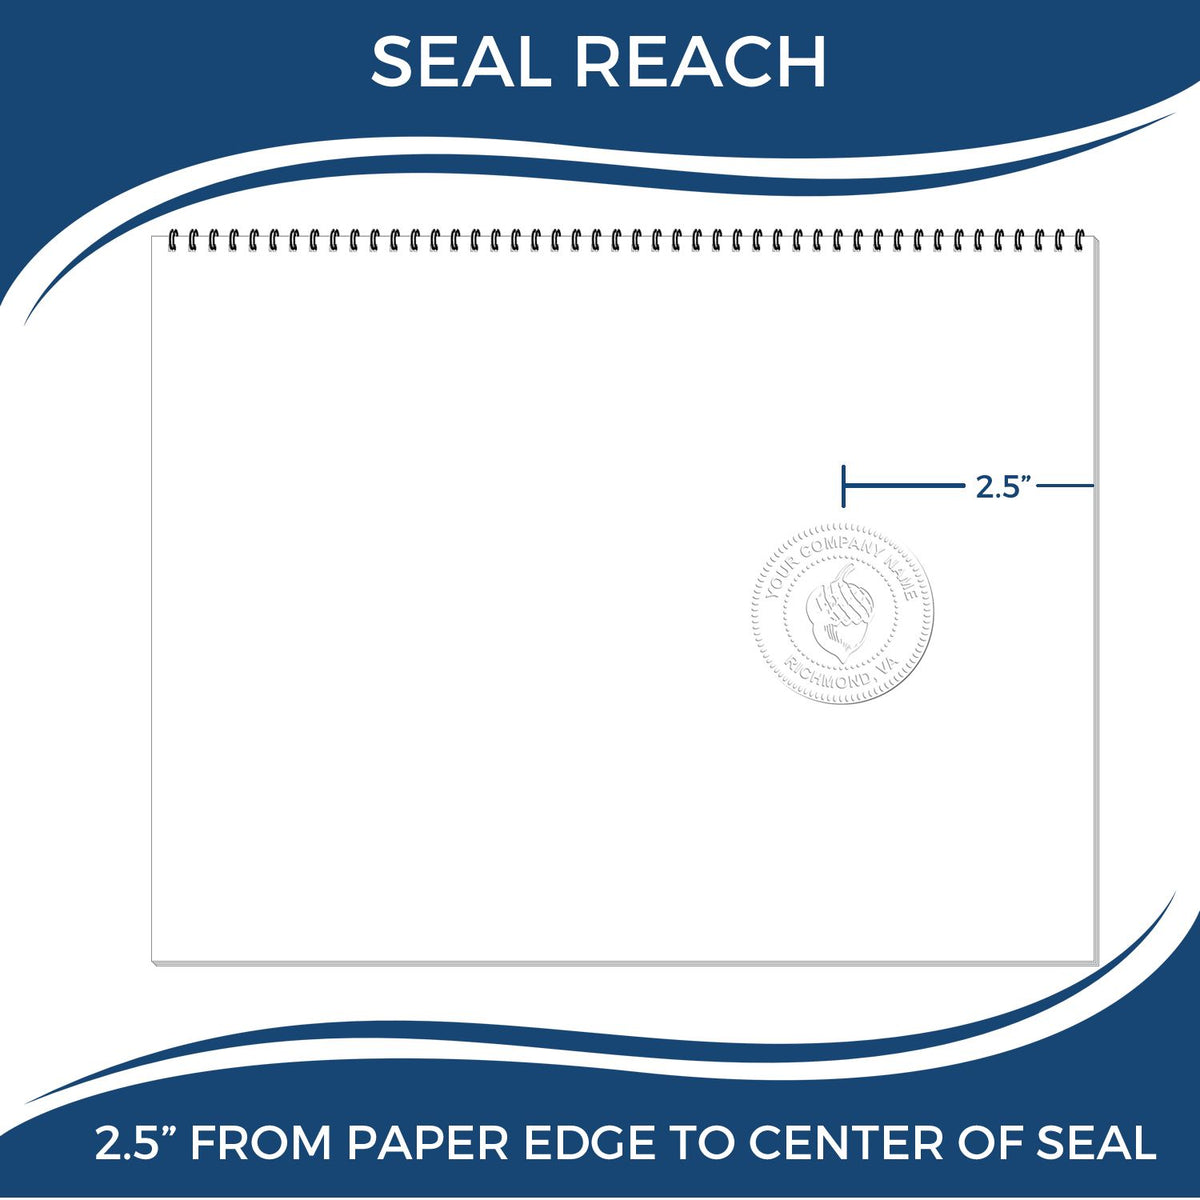 An infographic showing the seal reach which is represented by a ruler and a miniature seal image of the Long Reach Indiana Geology Seal